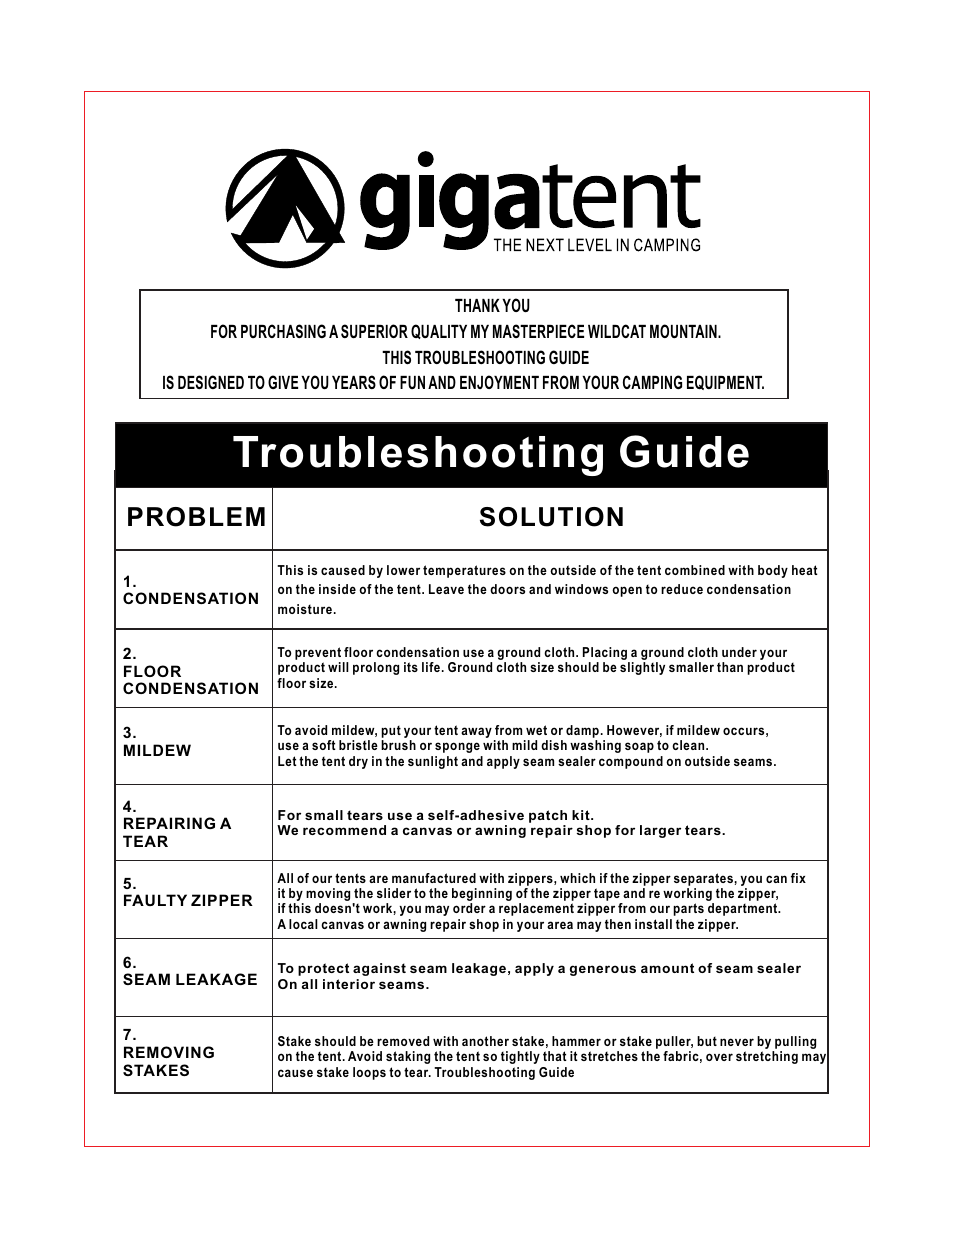 Troubleshooting guide, Problem solution | Giga Tent GT 007 User Manual | Page 5 / 7